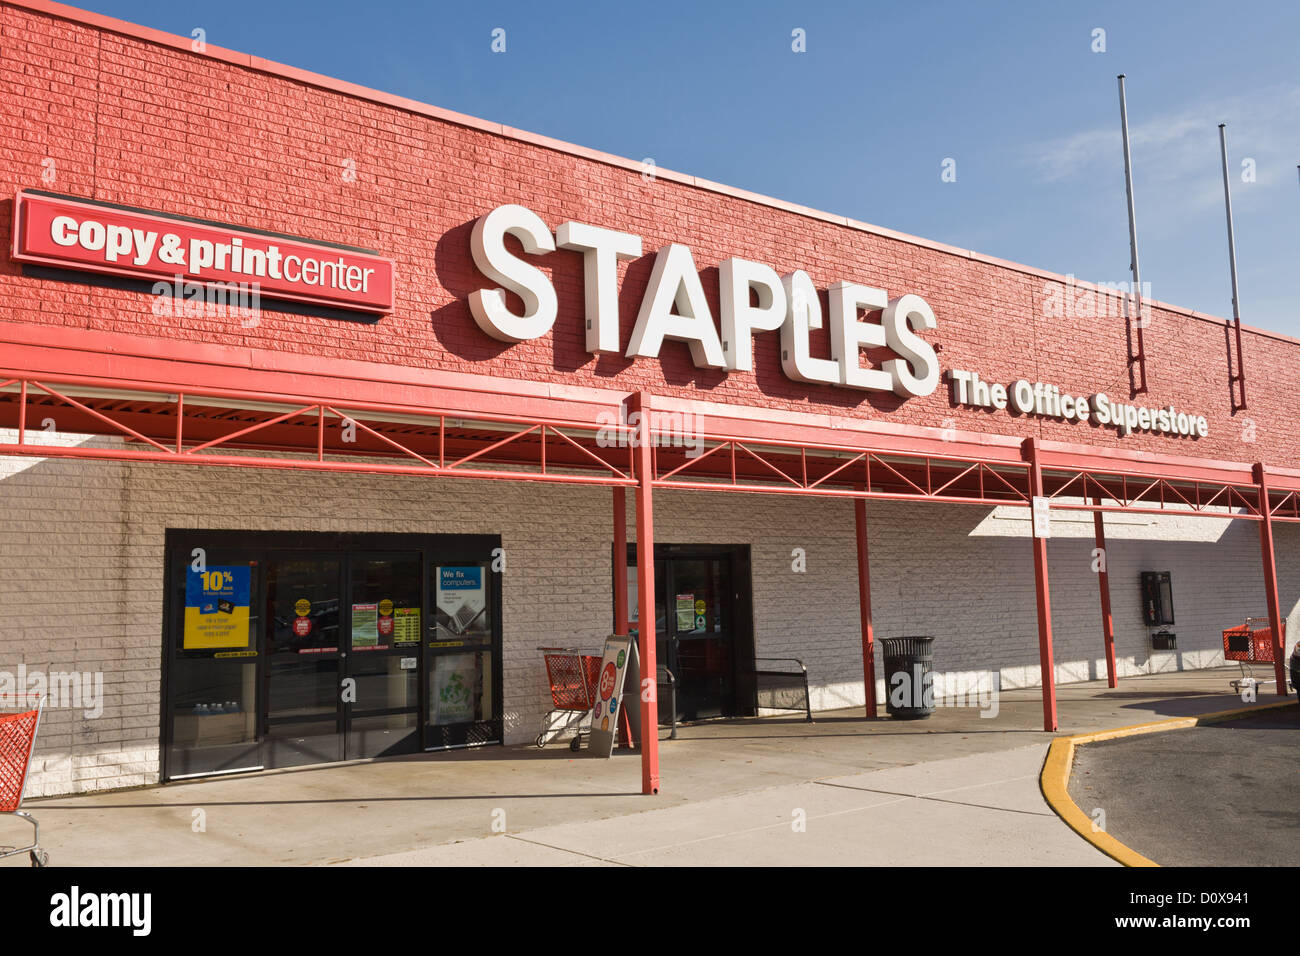 Staples Office Superstore, at a mall in Maryland, USA Stock Photo